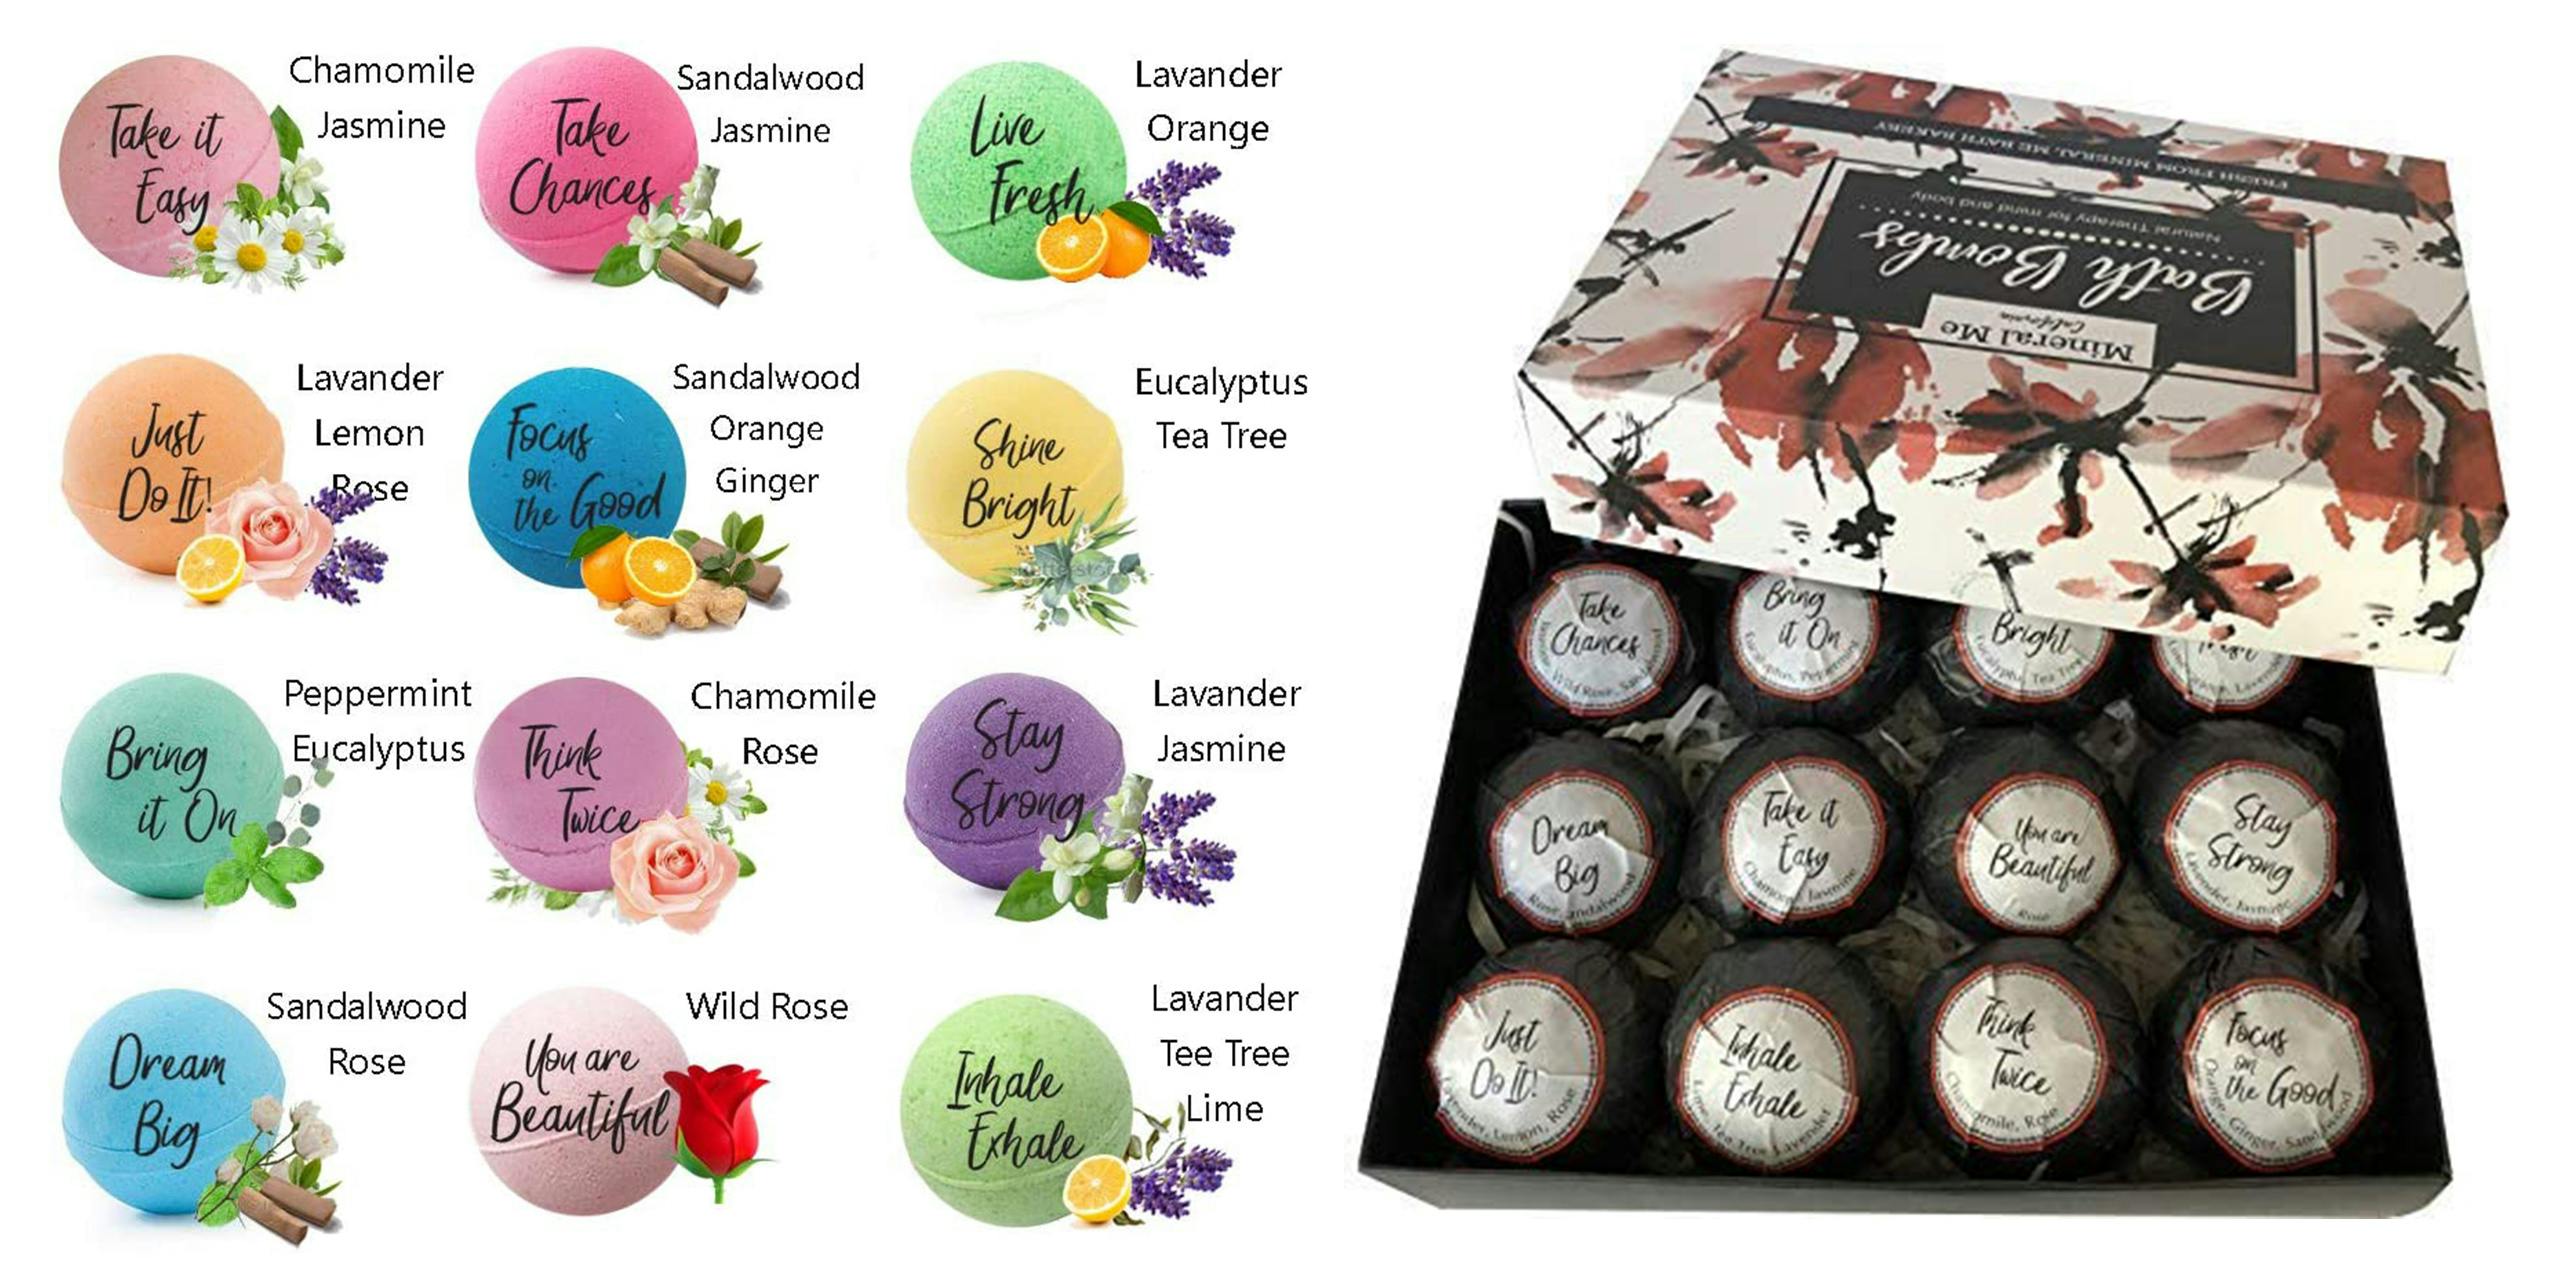 A selection of inspirational bath bombs make a great self care gifts.